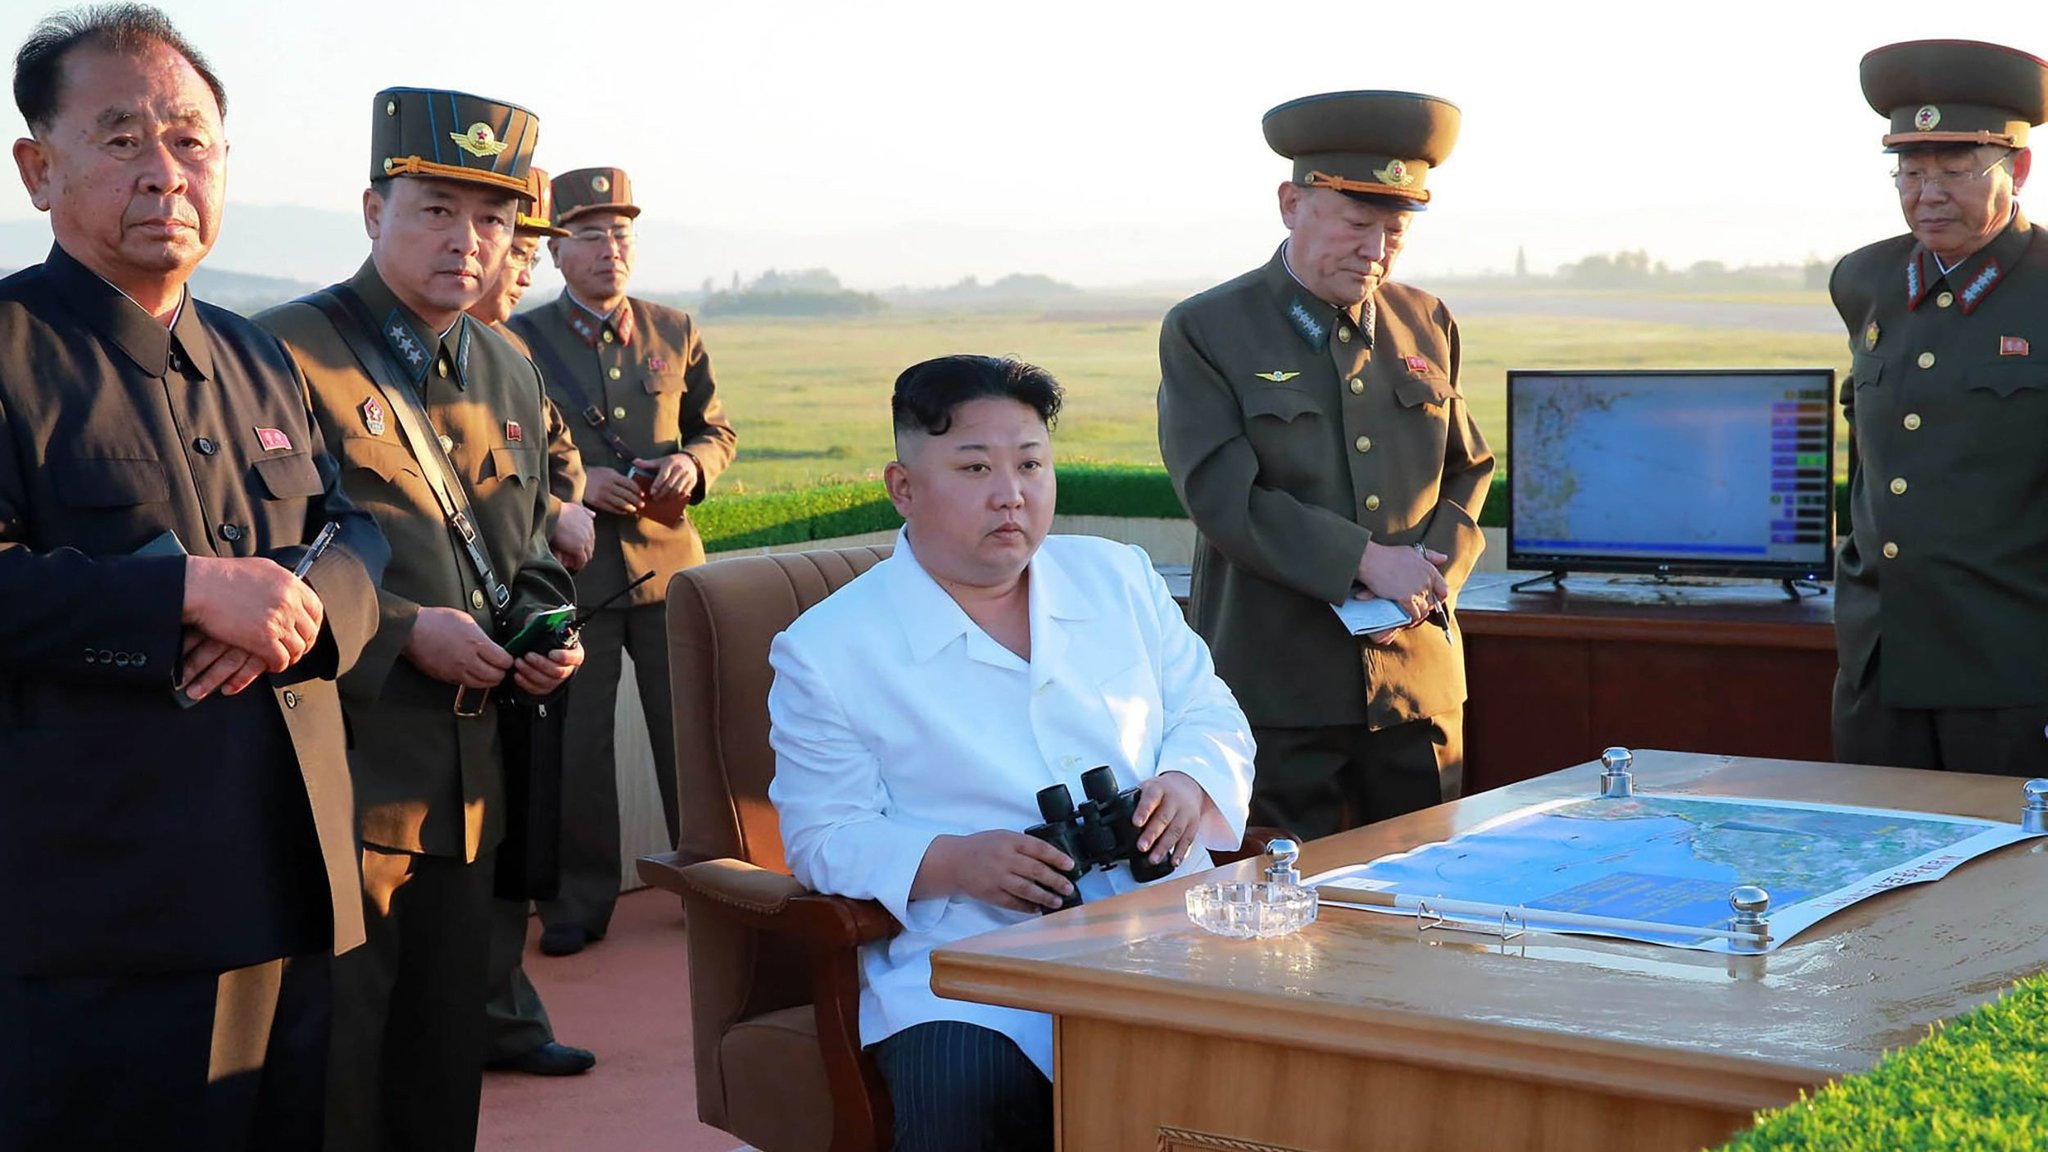 Kim Jong Un says build an army that no country can defeat